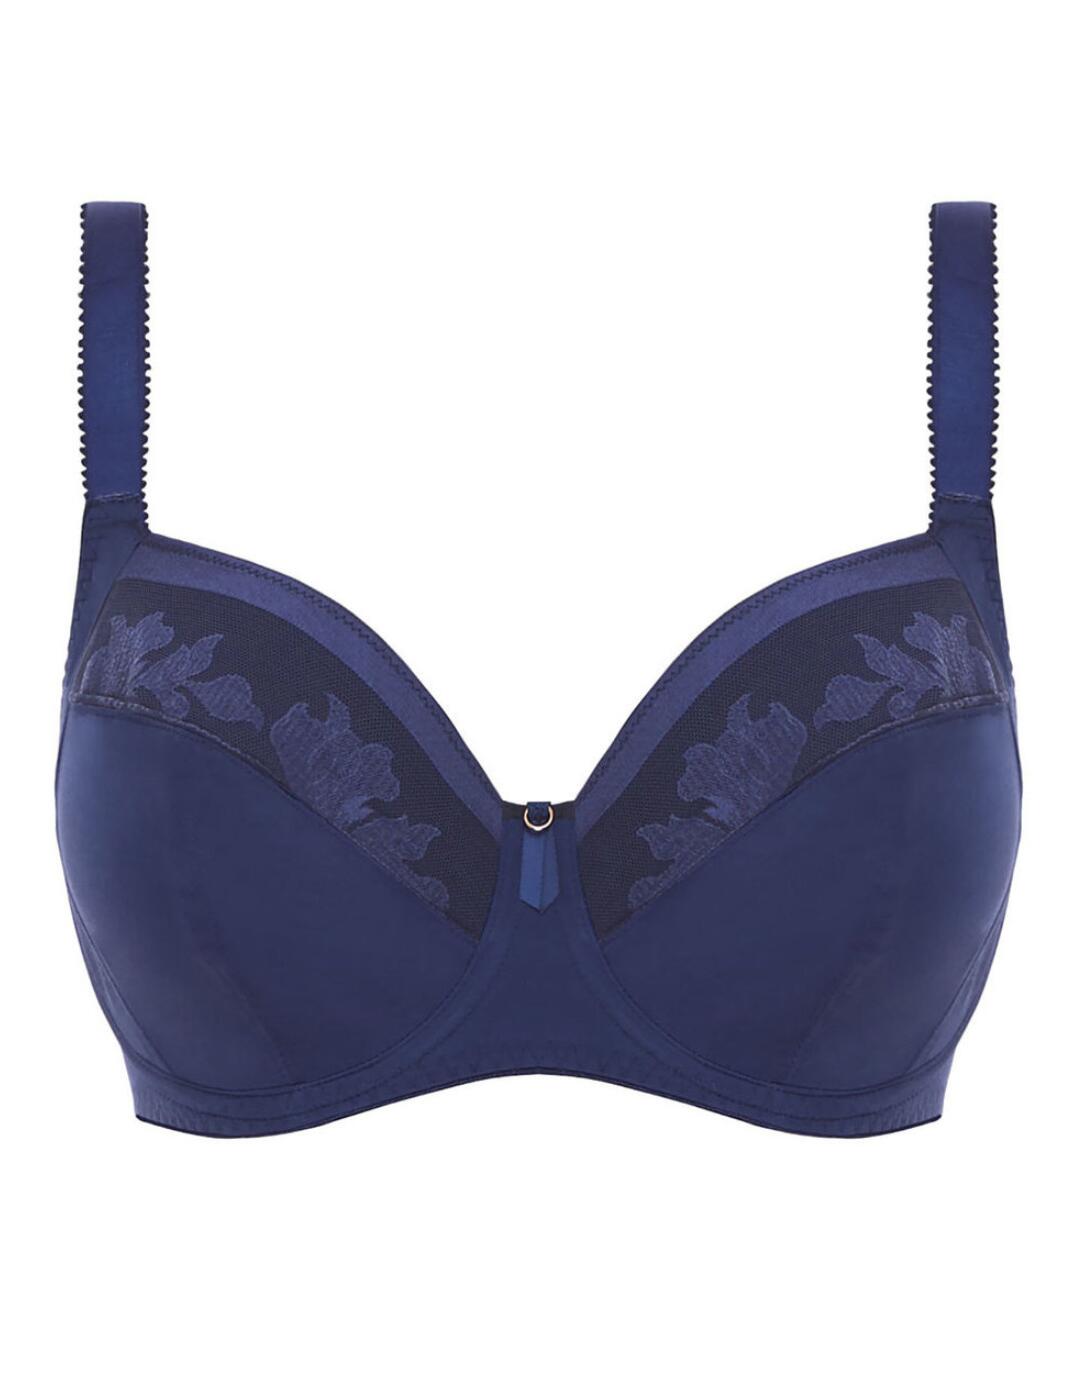 Fantasie Fusion FL3091 W Underwired Full Cup Side Support Bra Black 34 G CS  for sale online